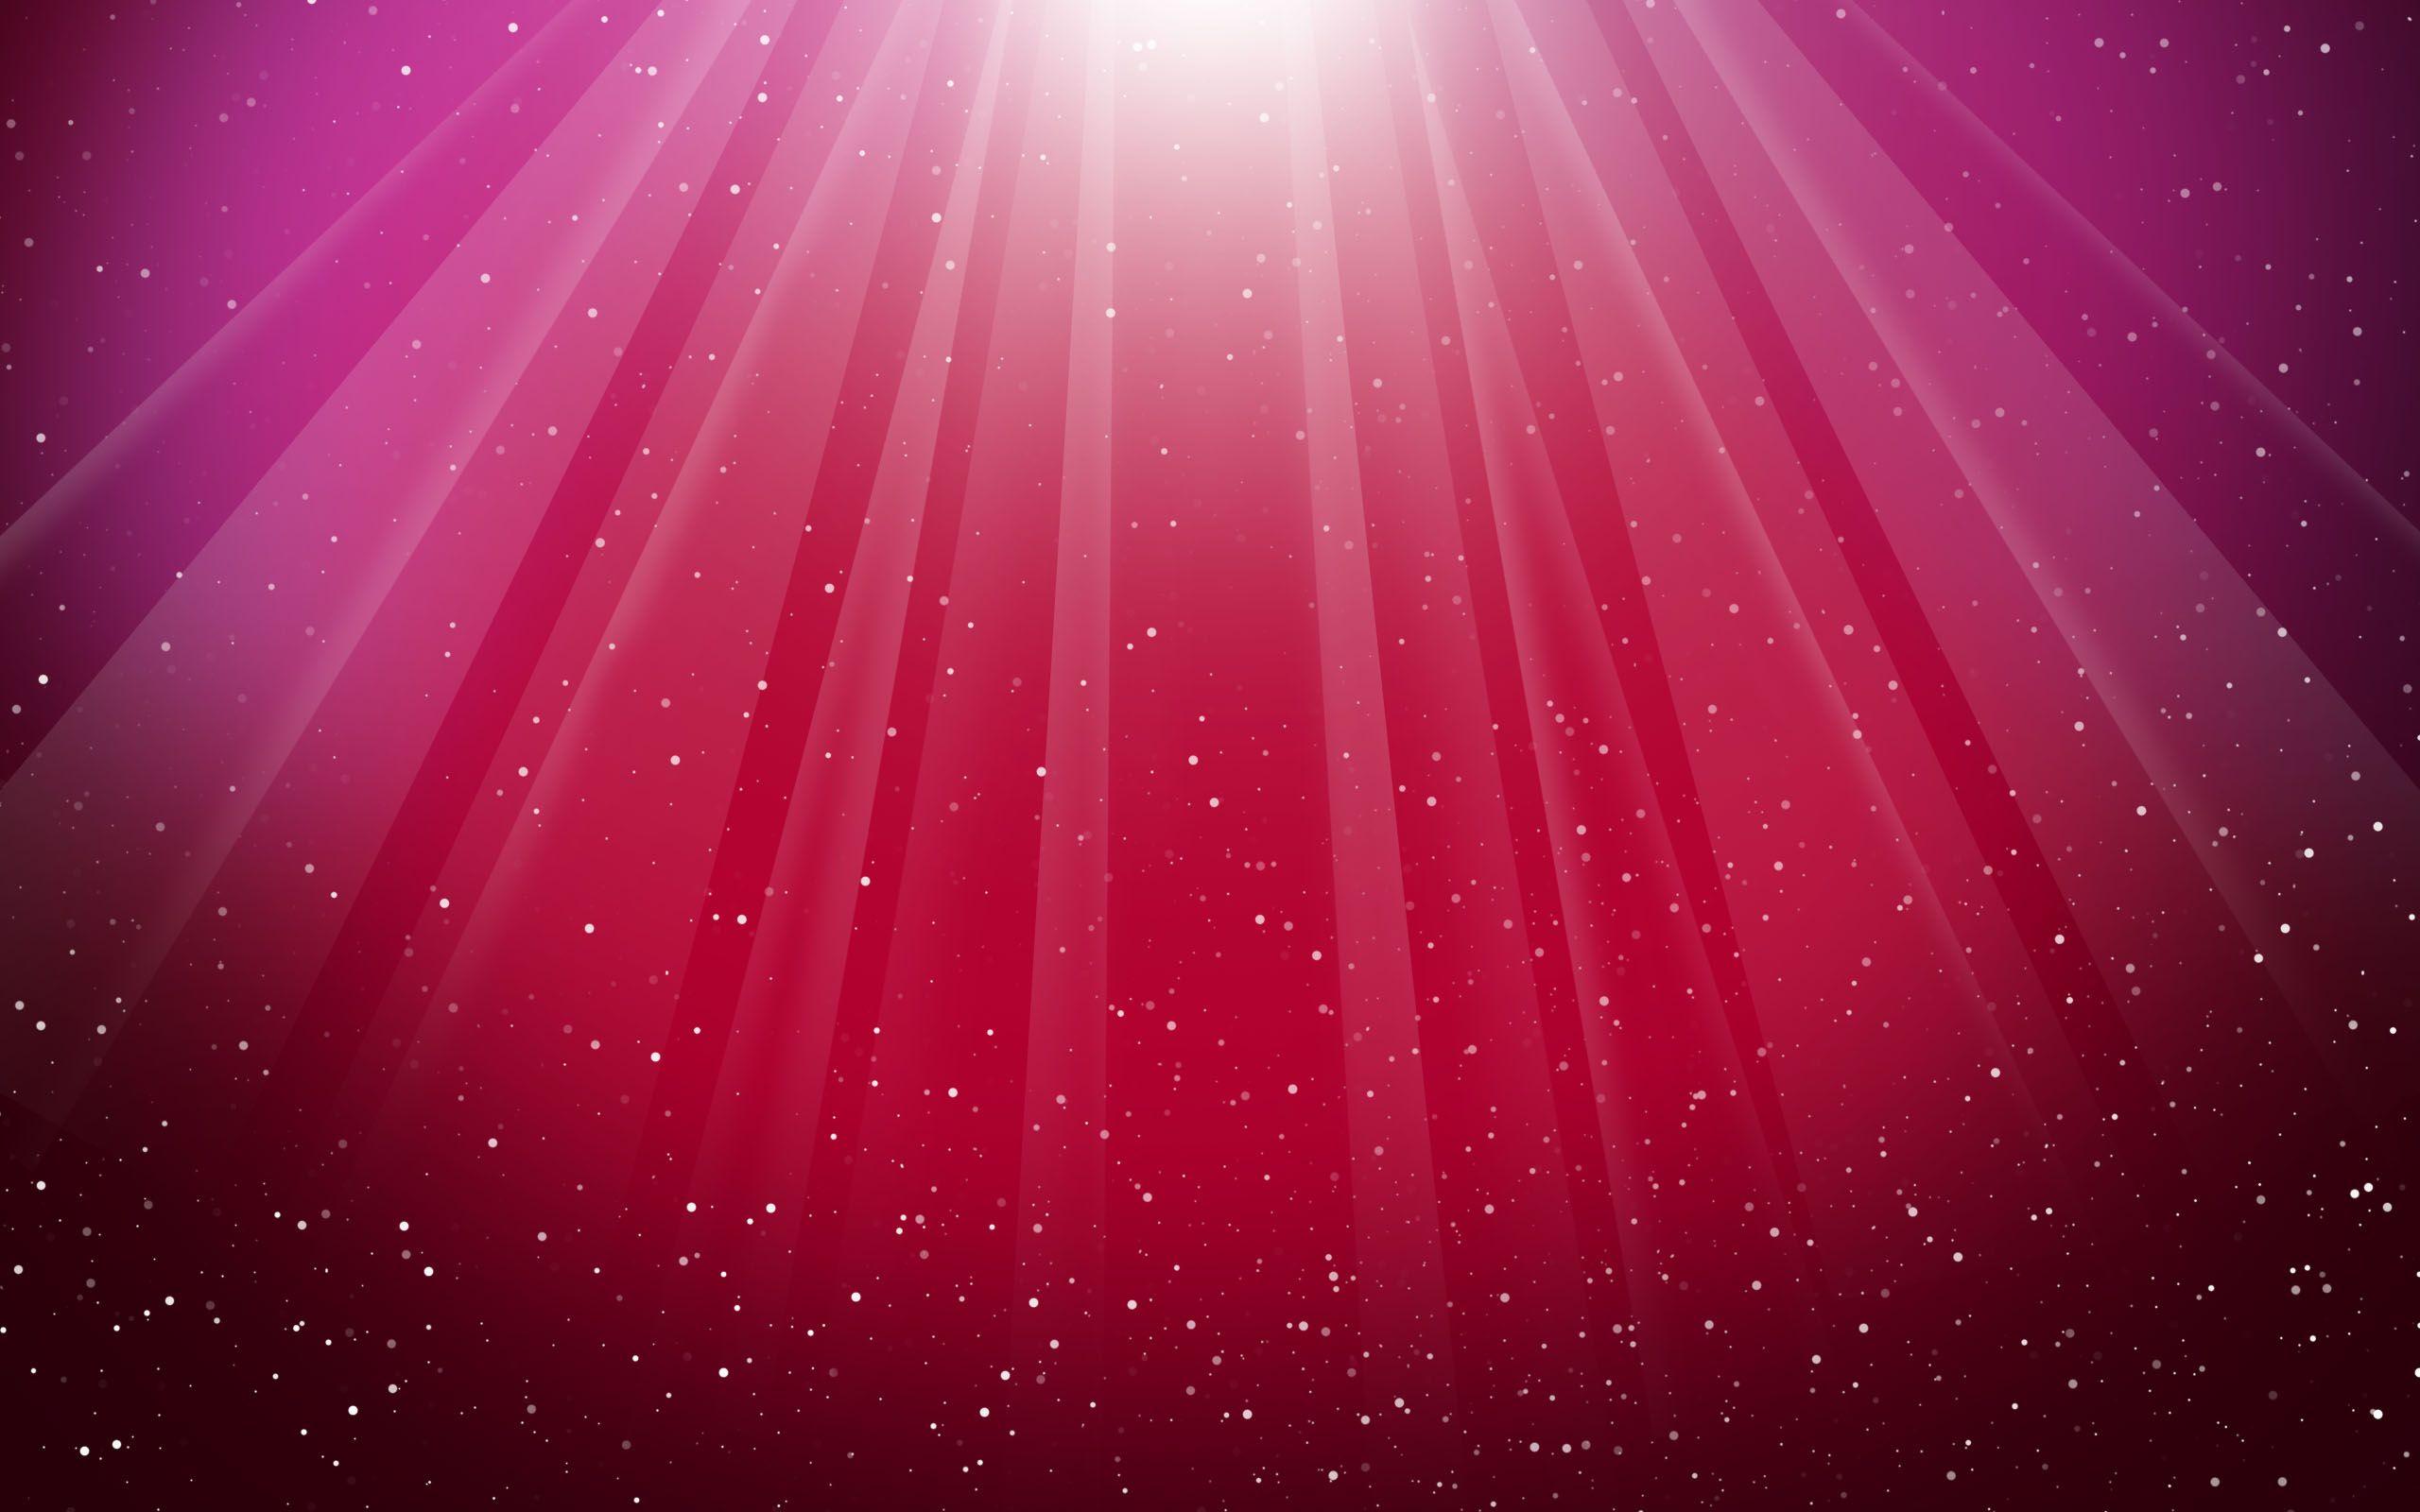 Red Shine. Free Desktop Wallpaper for Widescreen, HD and Mobile